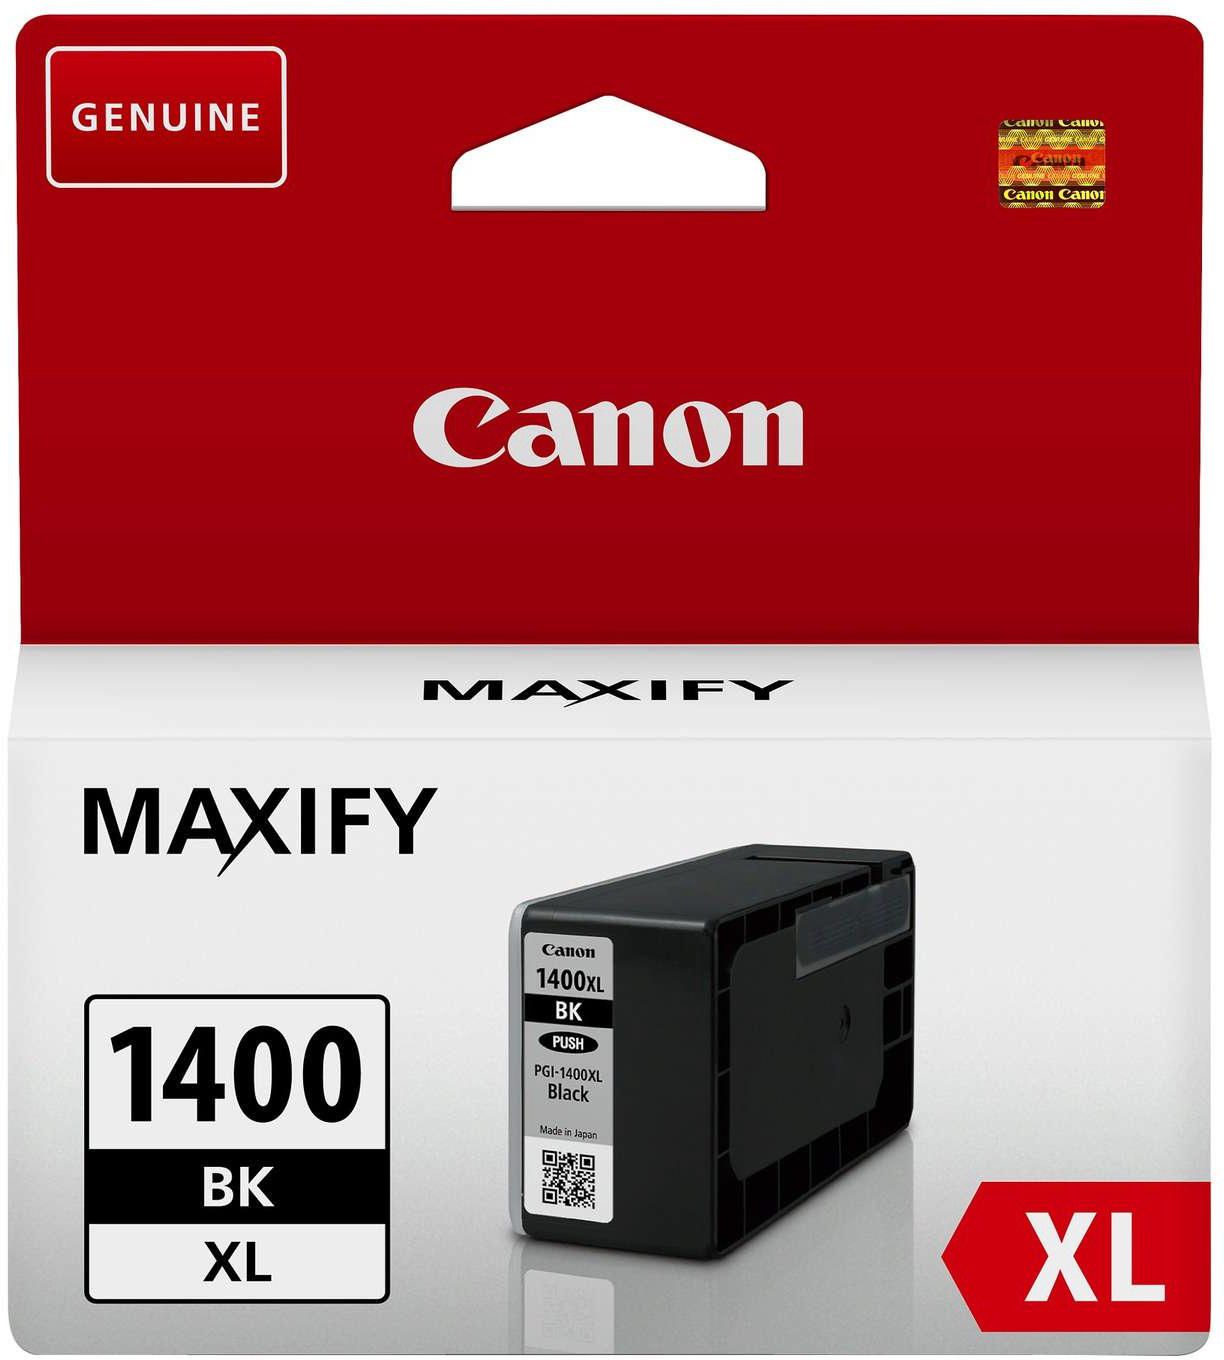 Canon 1400XL Black Ink Cartridge for Maxify MB2040 and MB2340